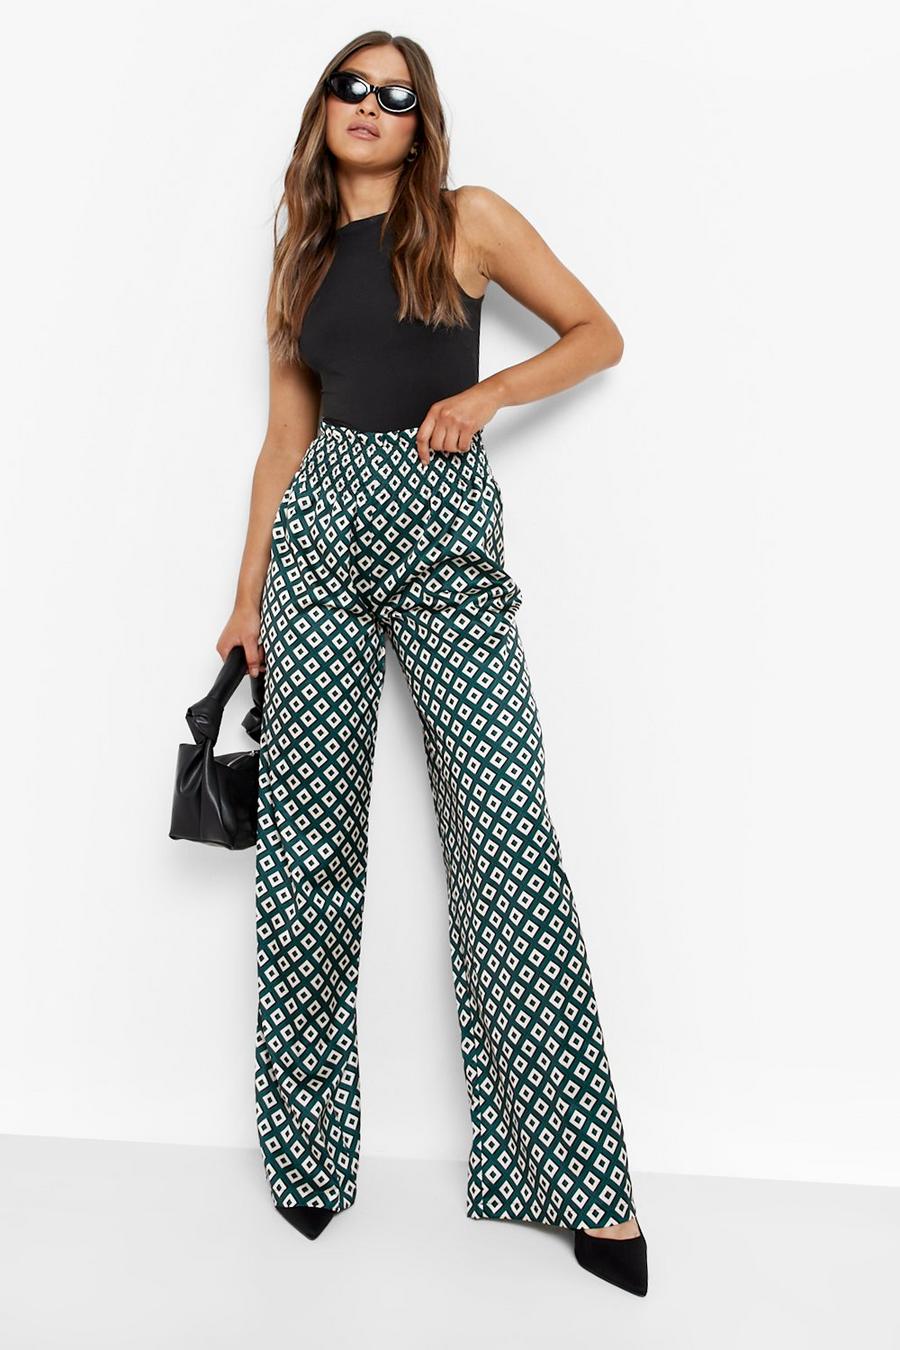 Rendezvous kompression Gør det tungt Satin Print Wide Leg Relaxed Trouser | boohoo